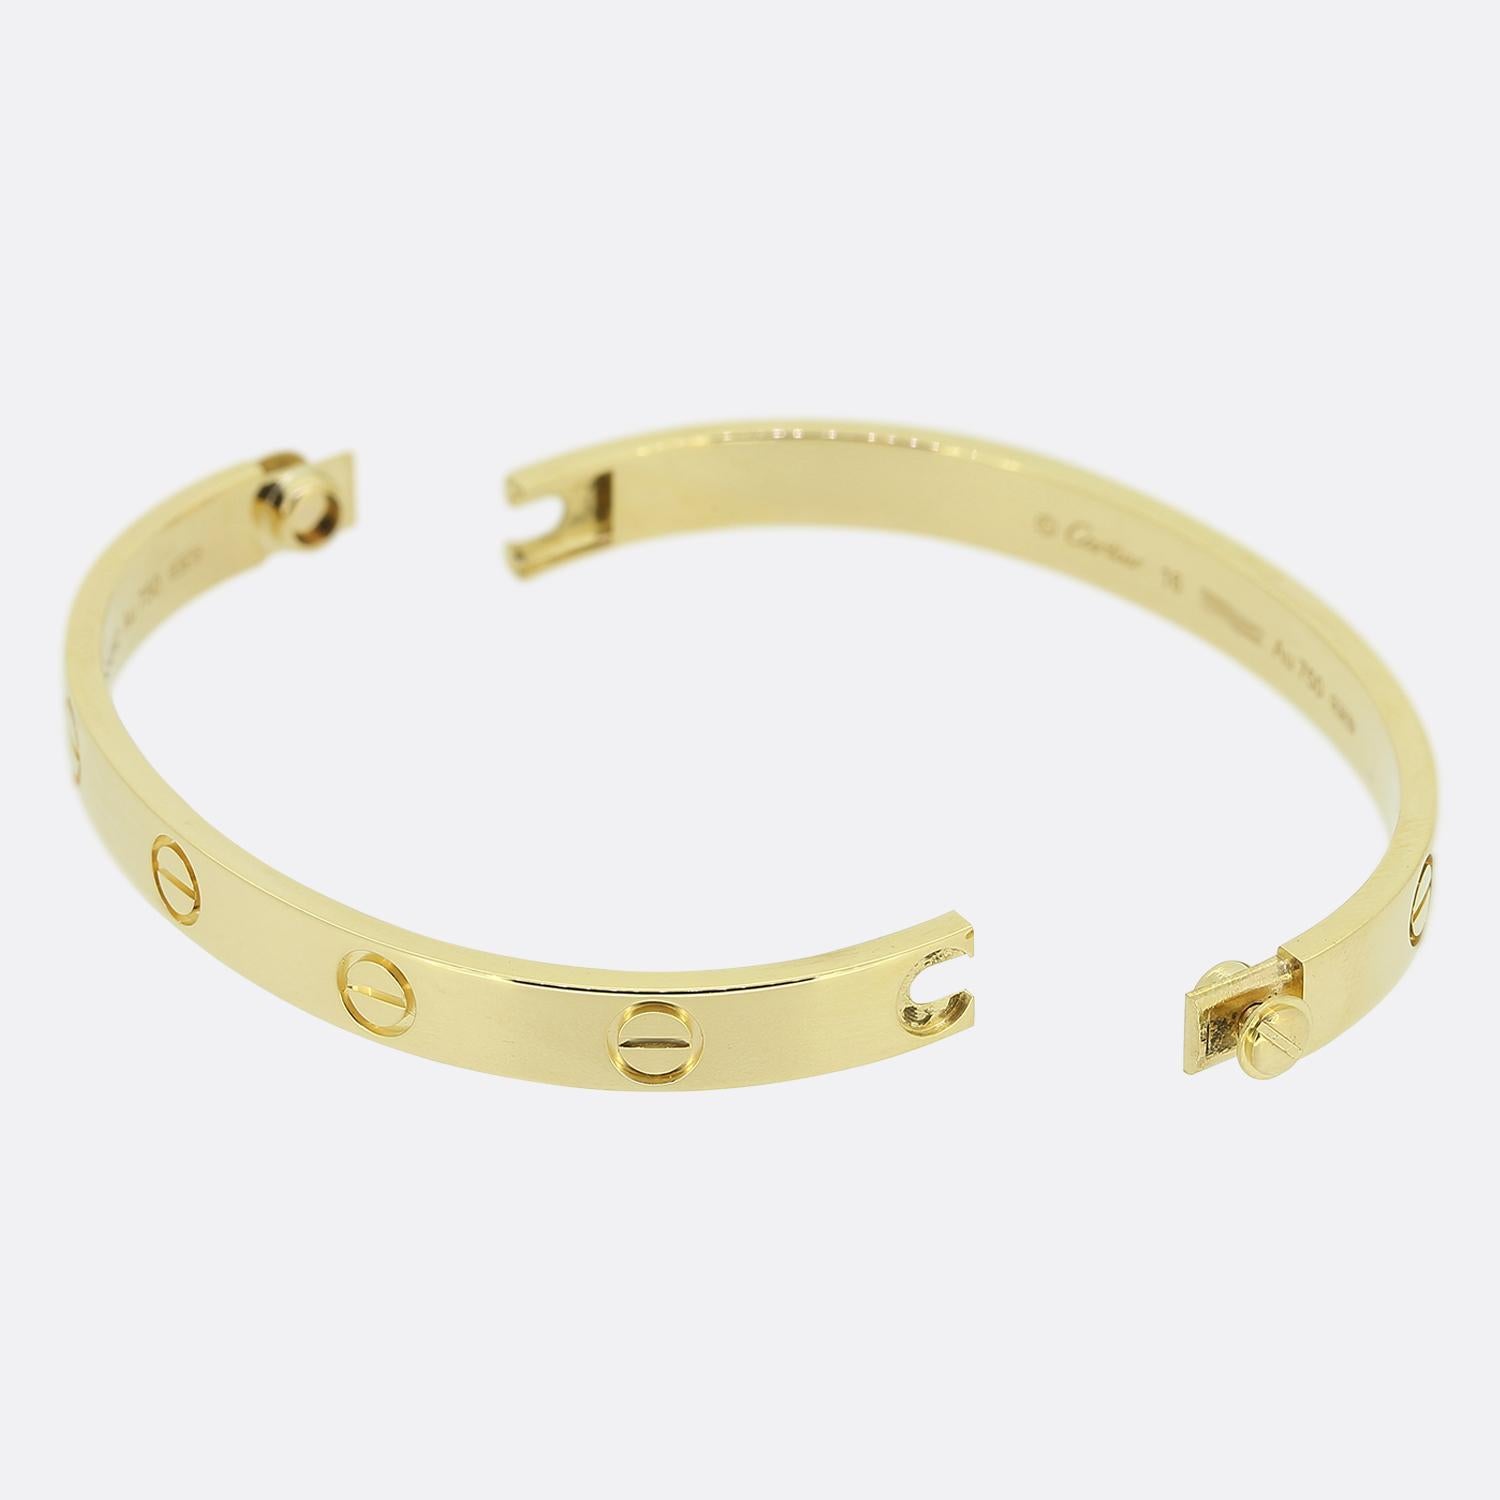 Here we have an 18ct yellow gold bangle from the world renowned luxury jewellery house of Cartier. This bangle forms part of the LOVE collection and is one of the most celebrated items of jewellery in the world. This particular model features the